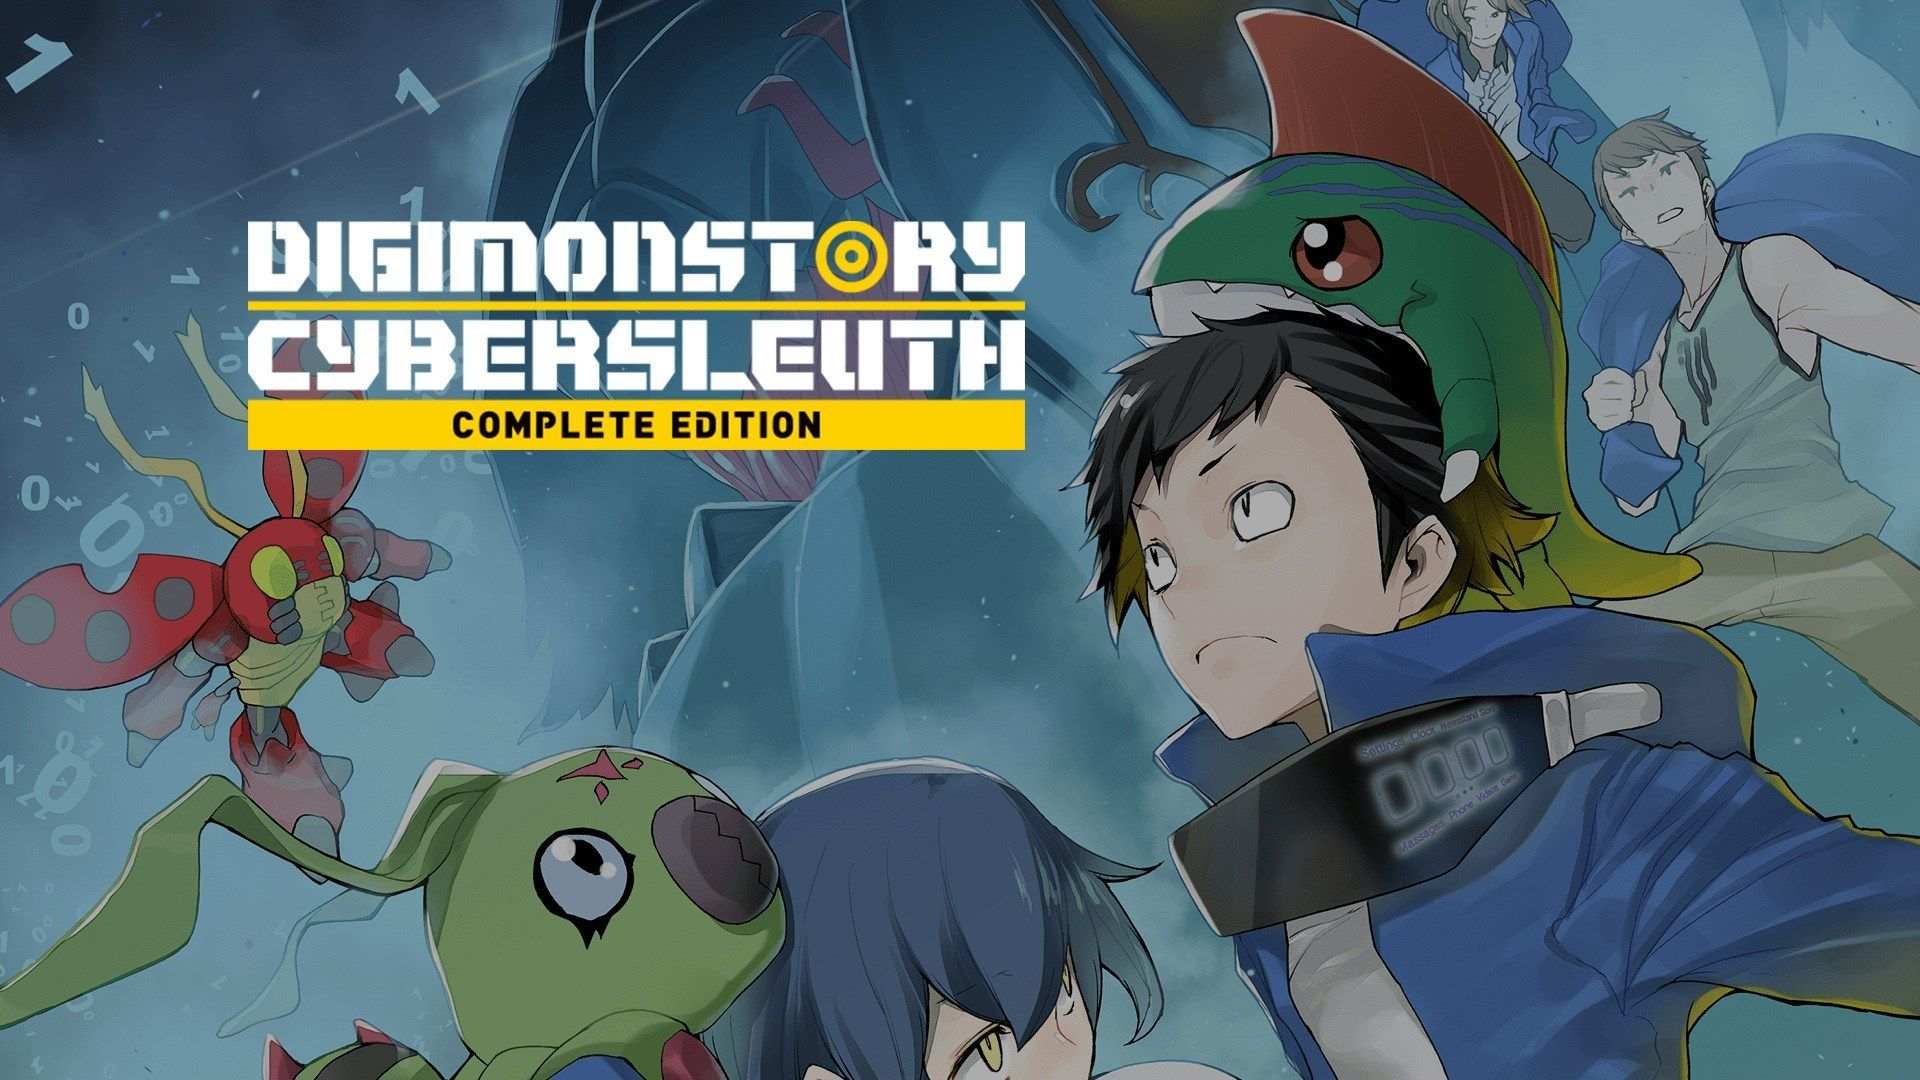 Bandai annuncia Digimon Story Cyber Sleuth: Complete Edition